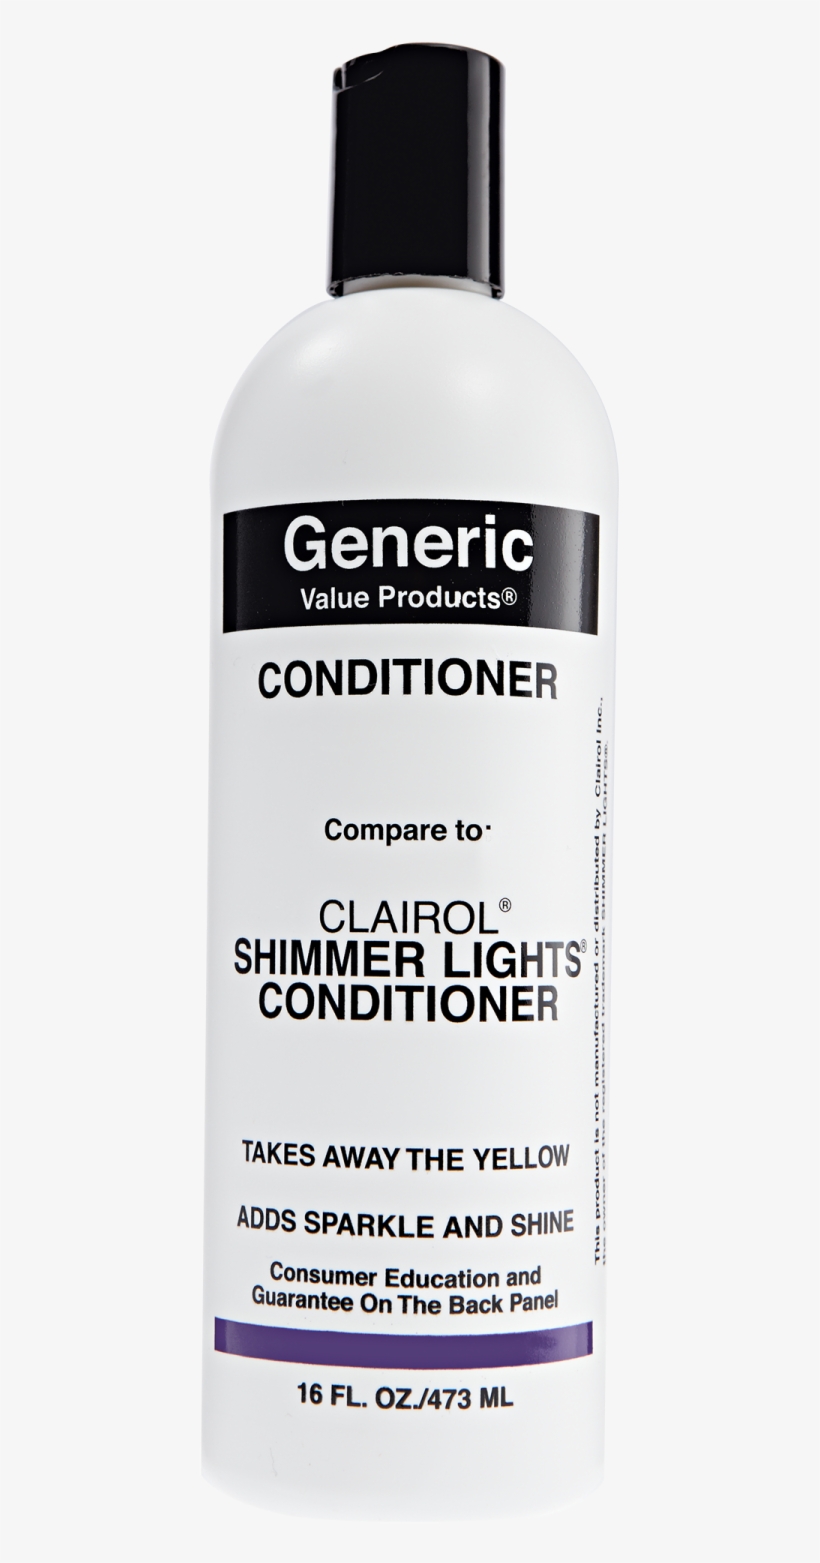 Conditioner Compare To Clairol Shimmer Lights Conditioner - Generic Value Products Tea Tree Oil Shampoo 33.8 Oz, transparent png #4797899